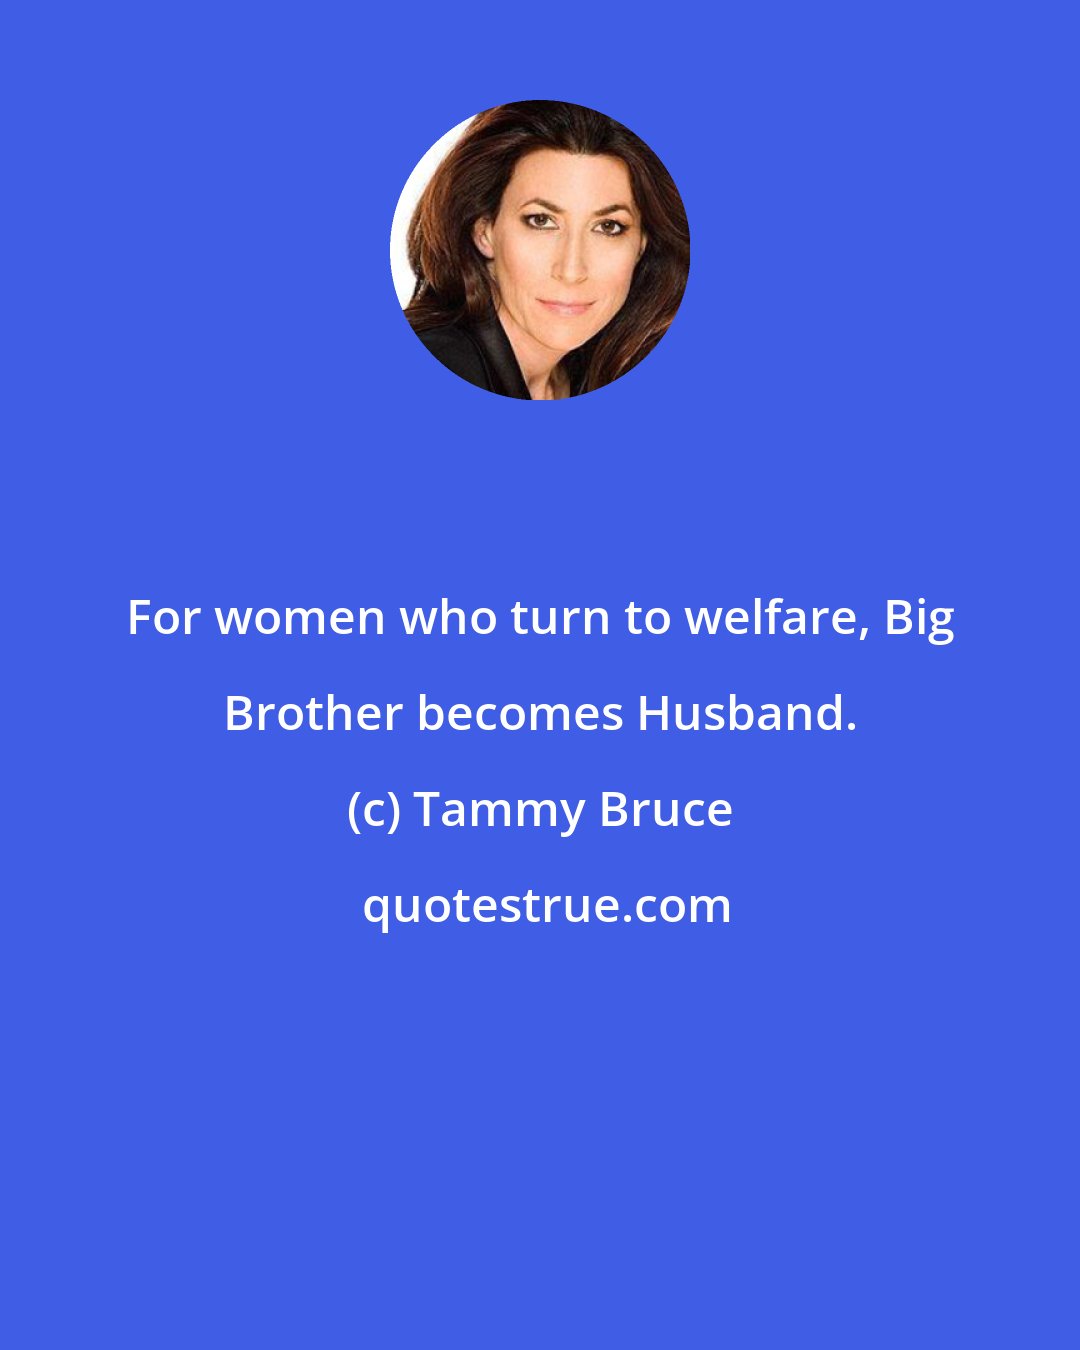 Tammy Bruce: For women who turn to welfare, Big Brother becomes Husband.